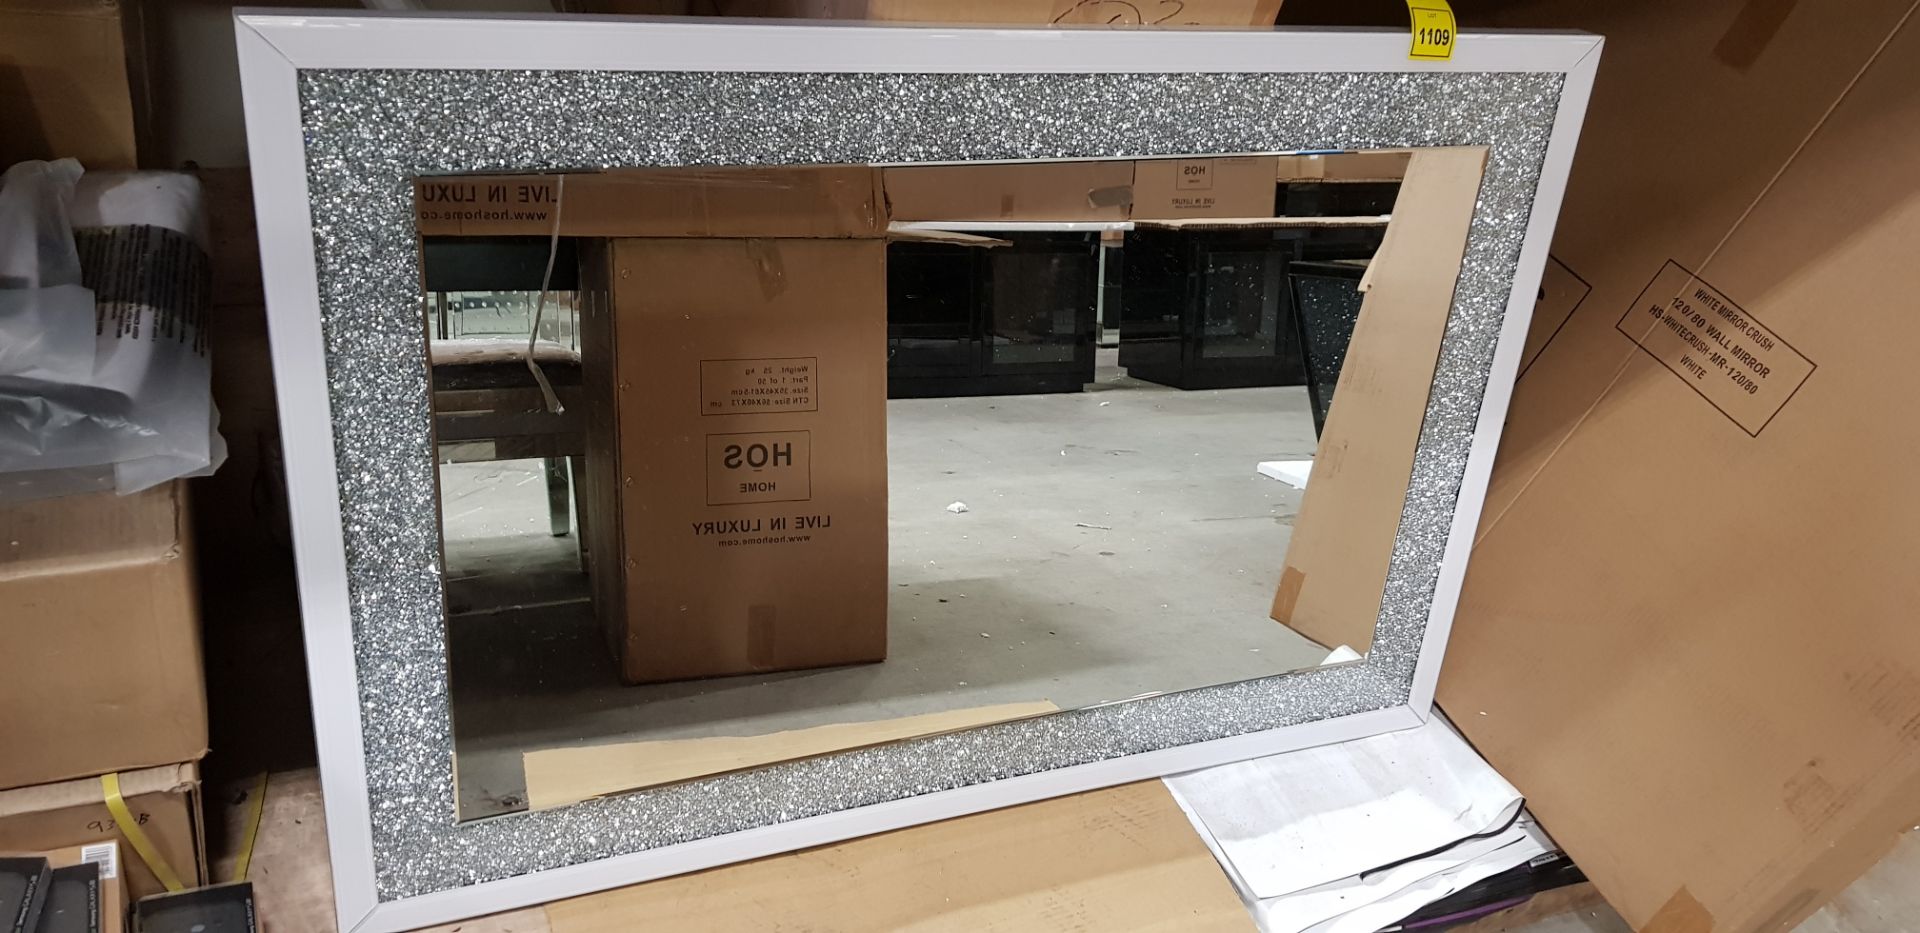 1 X WHITE MIRROR CRUSH 120/80 WALL MIRROR (120X80X4CM) (29KG) - WITH BOX ** NOTE: THESE ITEMS ARE TO